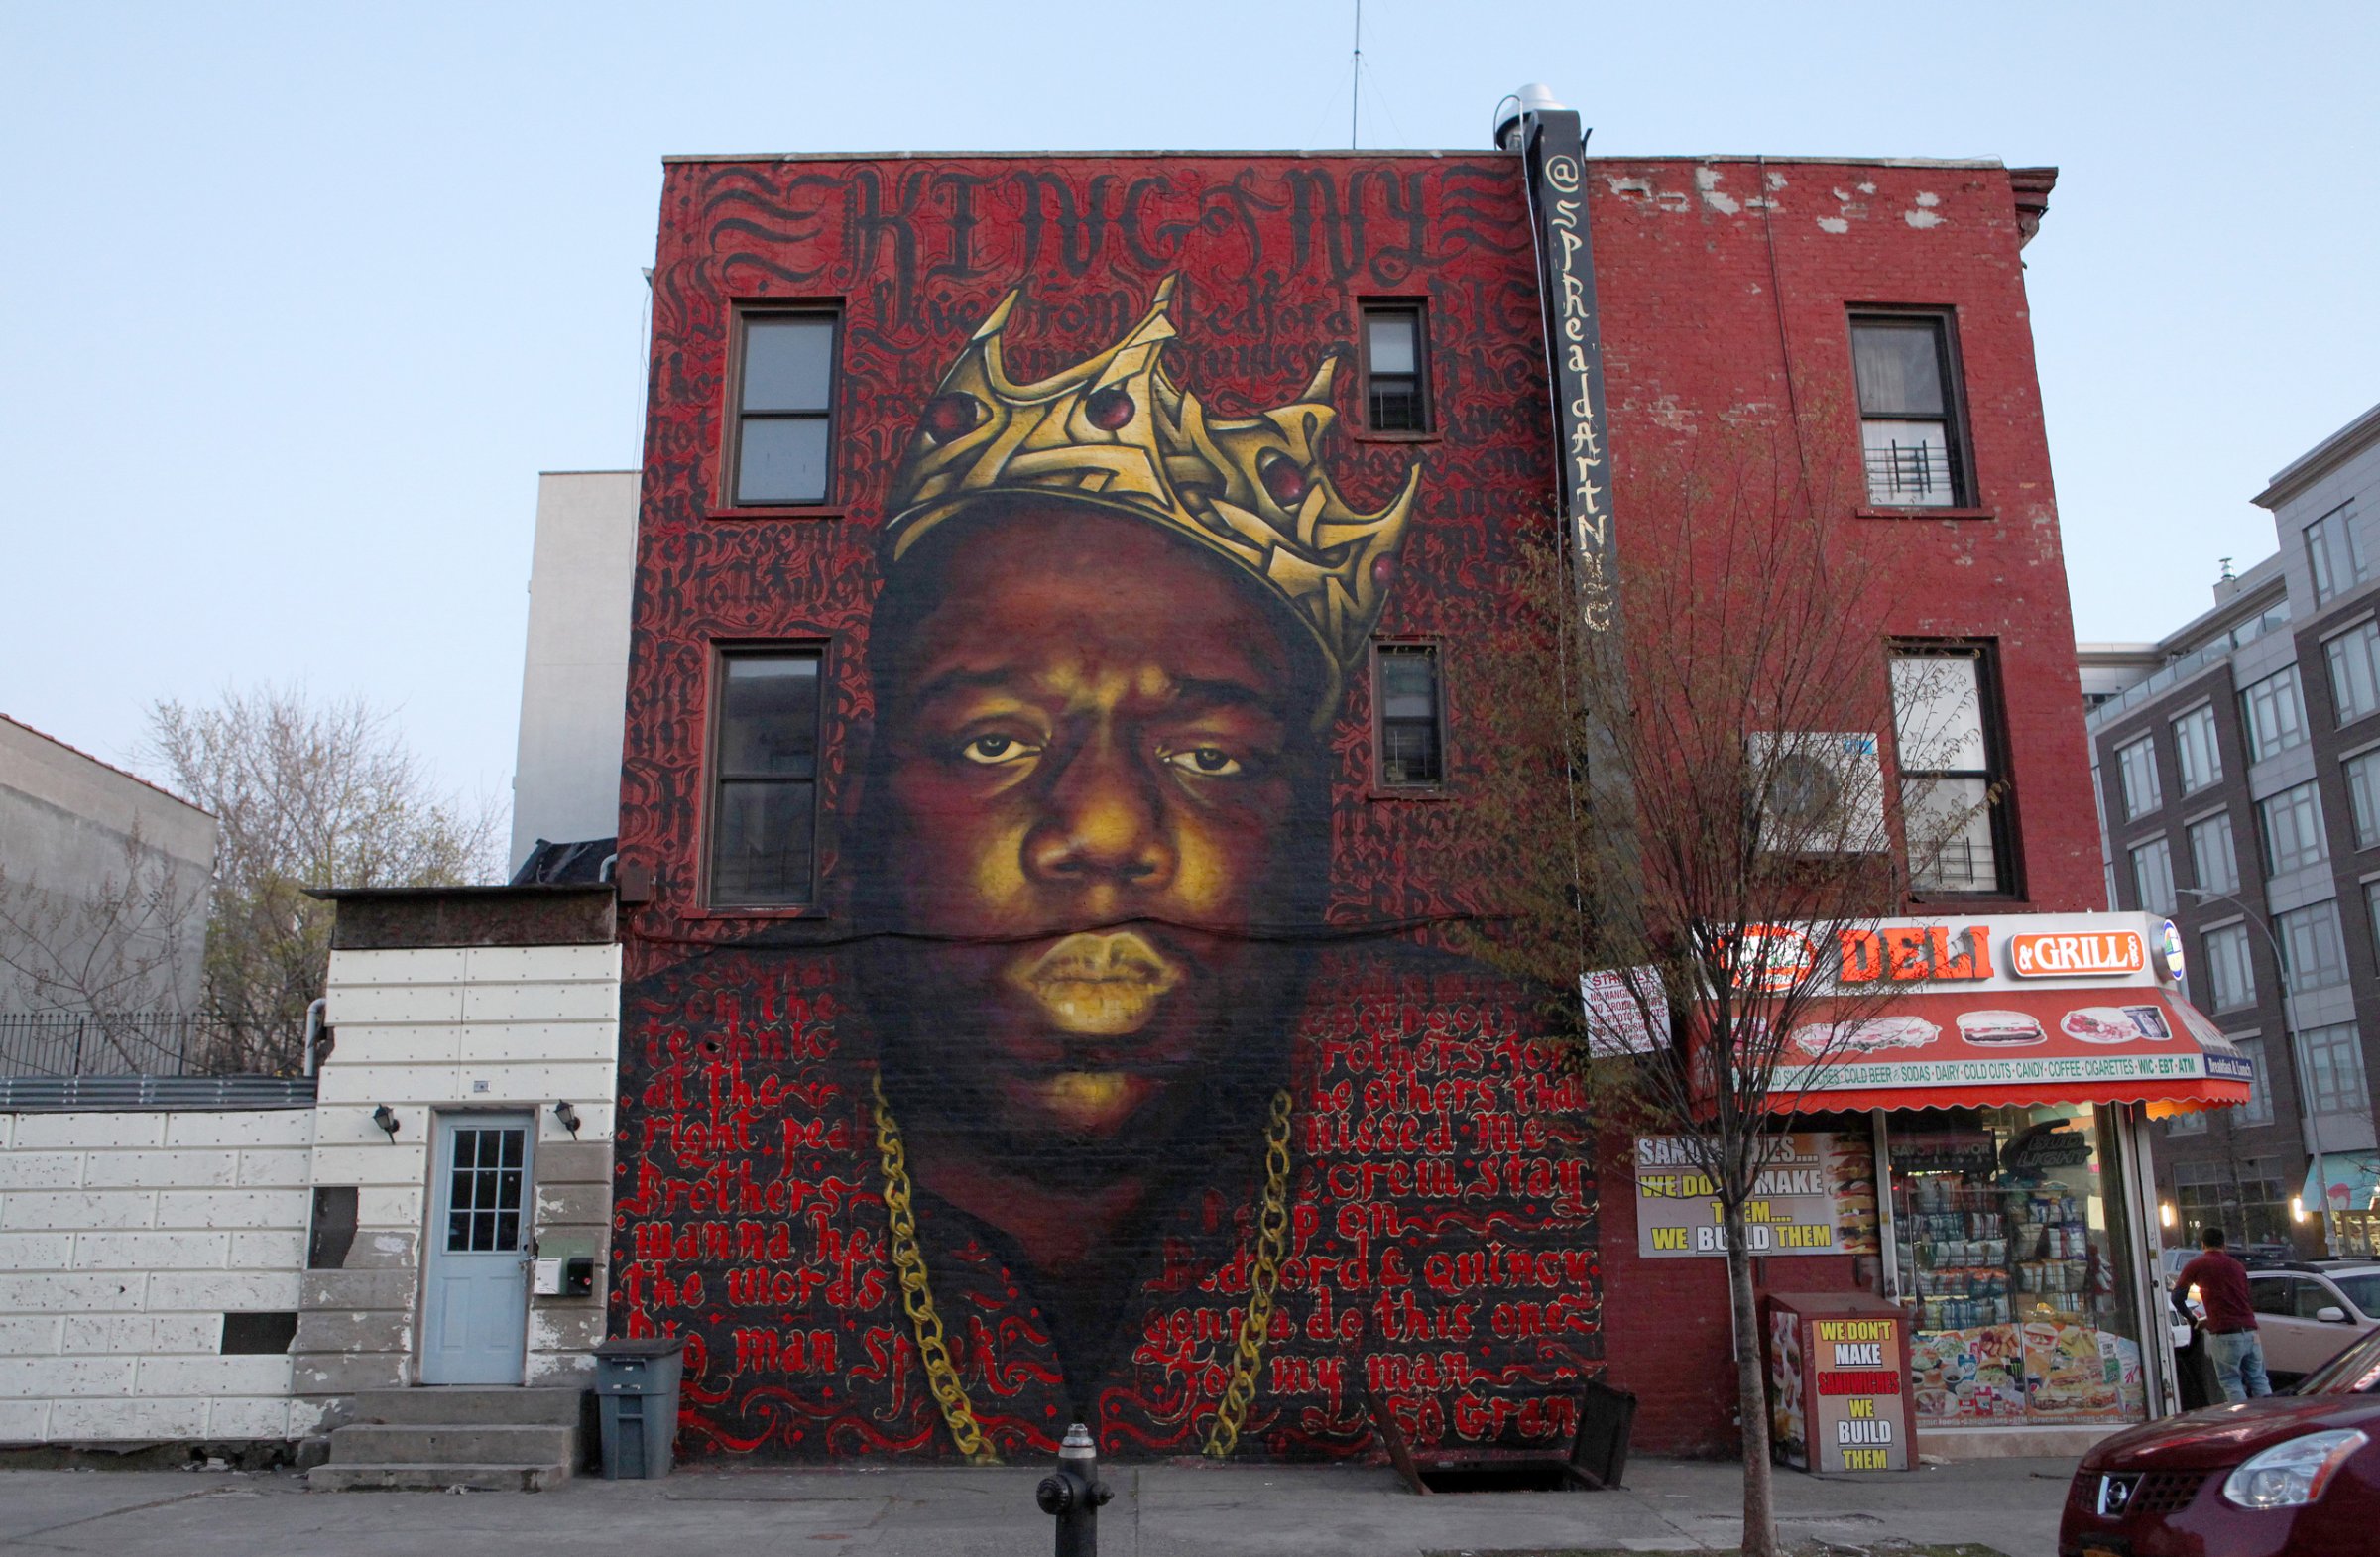 BROOKLYN, NY - APRIL 15: Scott 'Zimer' Zimmerman and Naoufal 'Rocko' Alaoui's mural of late rapper Christopher 'Notorious B.I.G.' Wallace in the Bedford-Stuyvesant neighborhood of Brooklyn, New York on April 15, 2016. (Photo By Raymond Boyd/Getty Images)